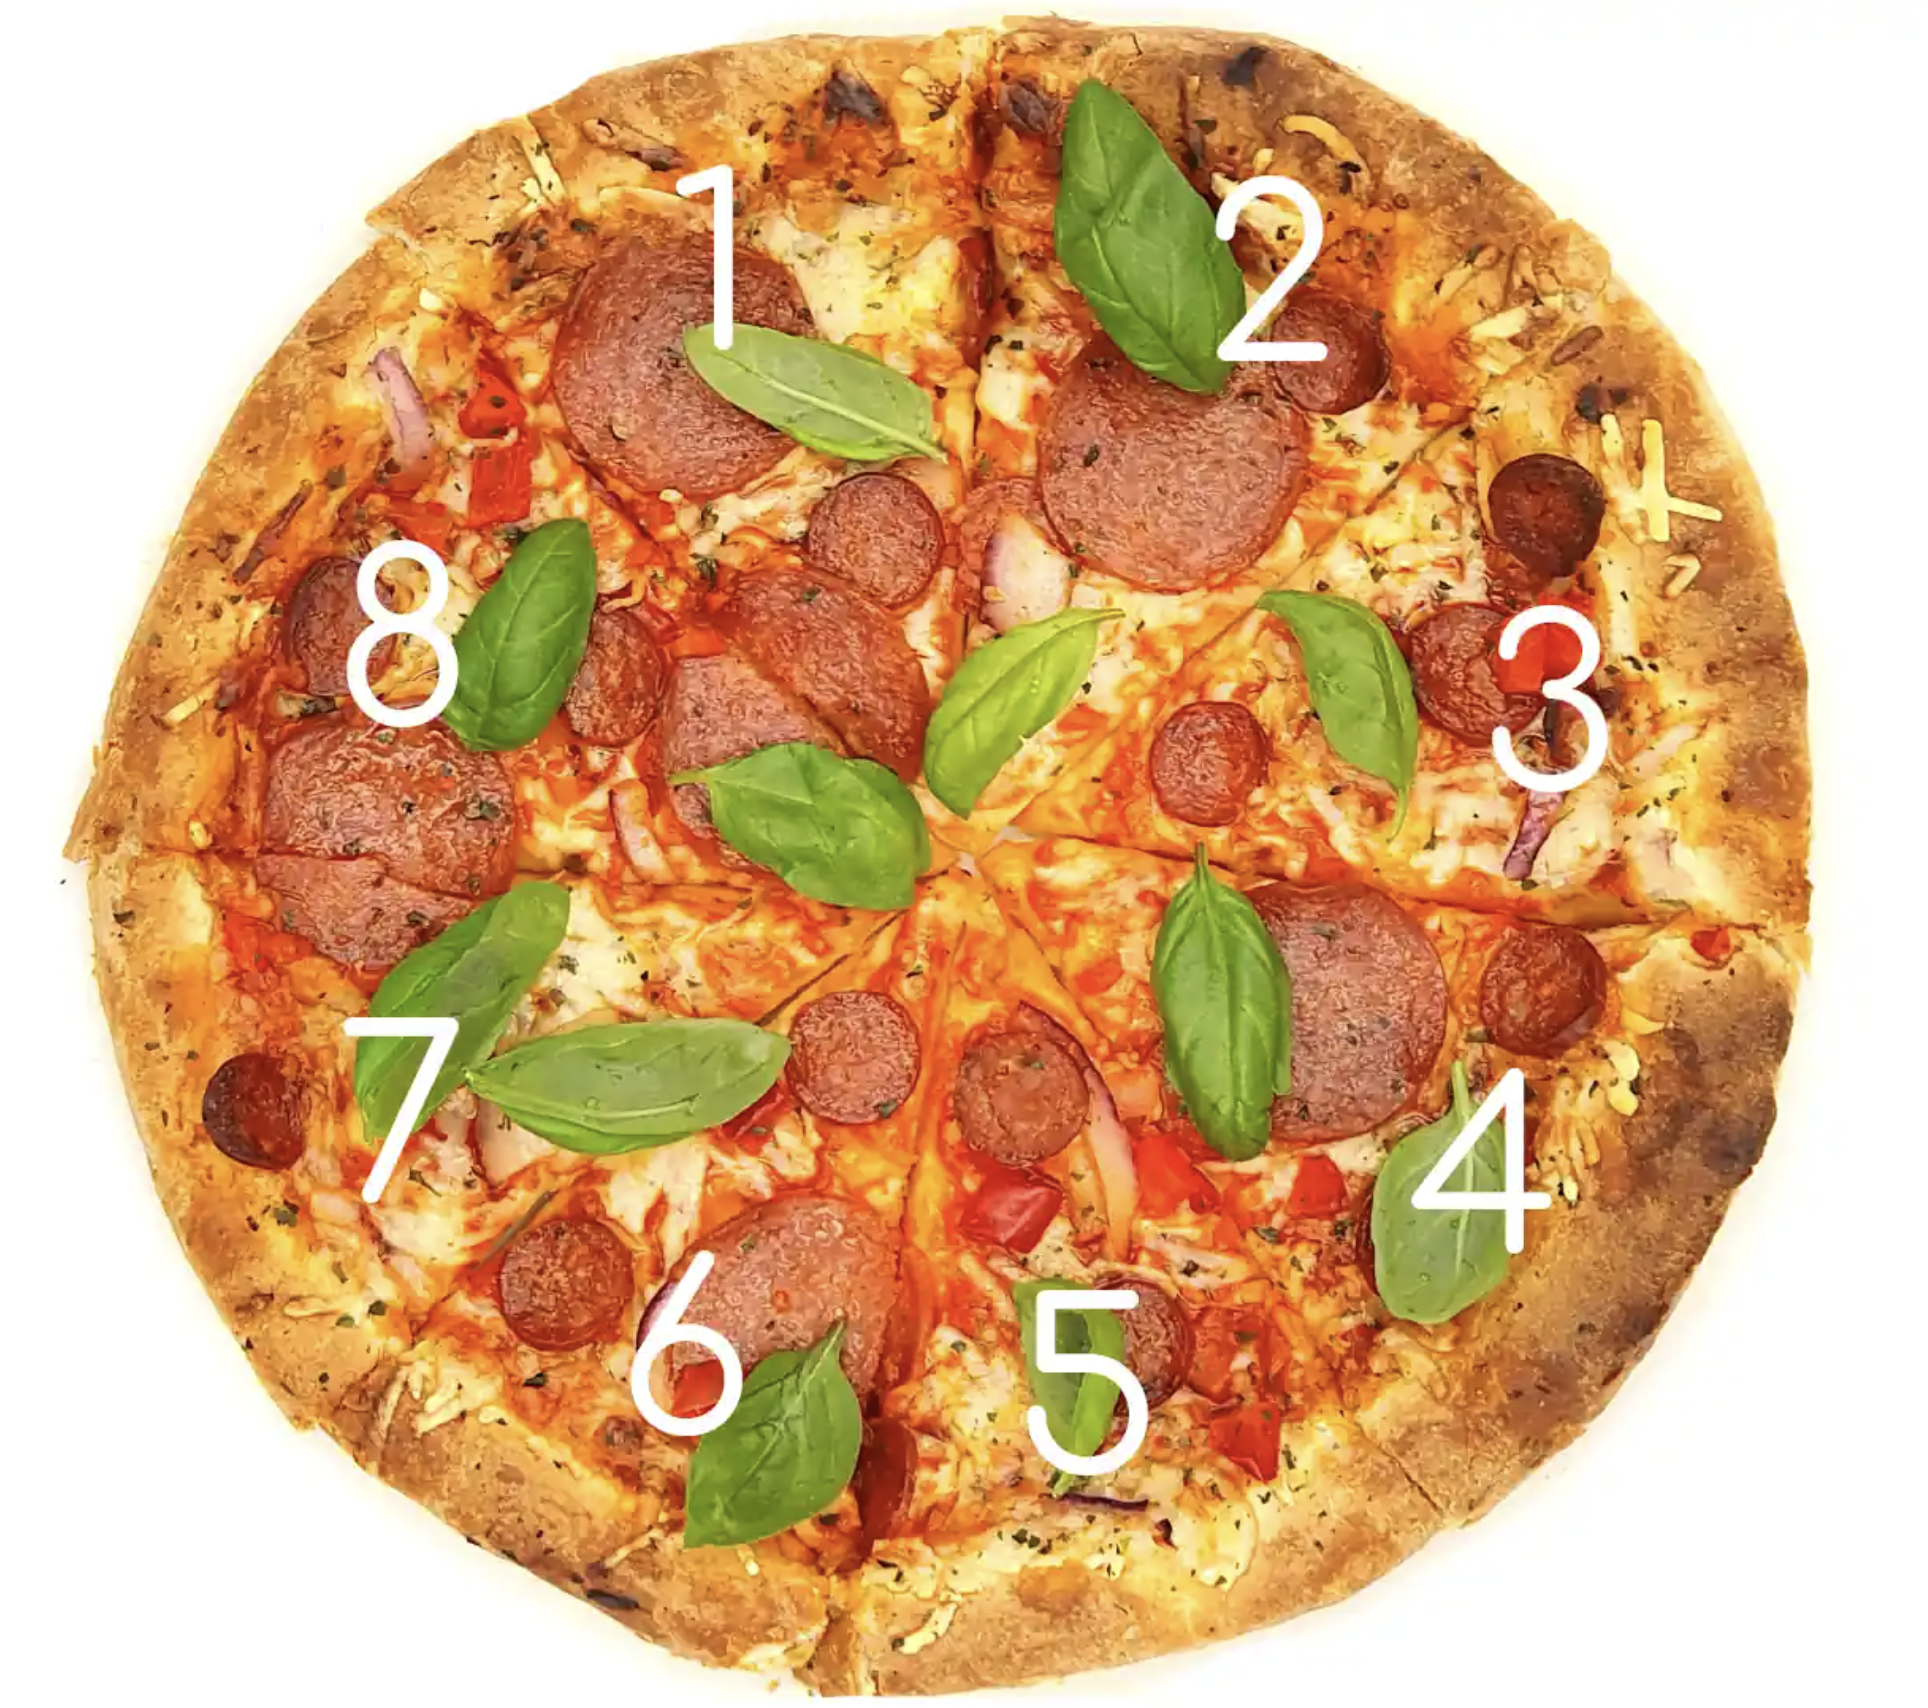 How Many Slices Are In A 12 Inch Pizza